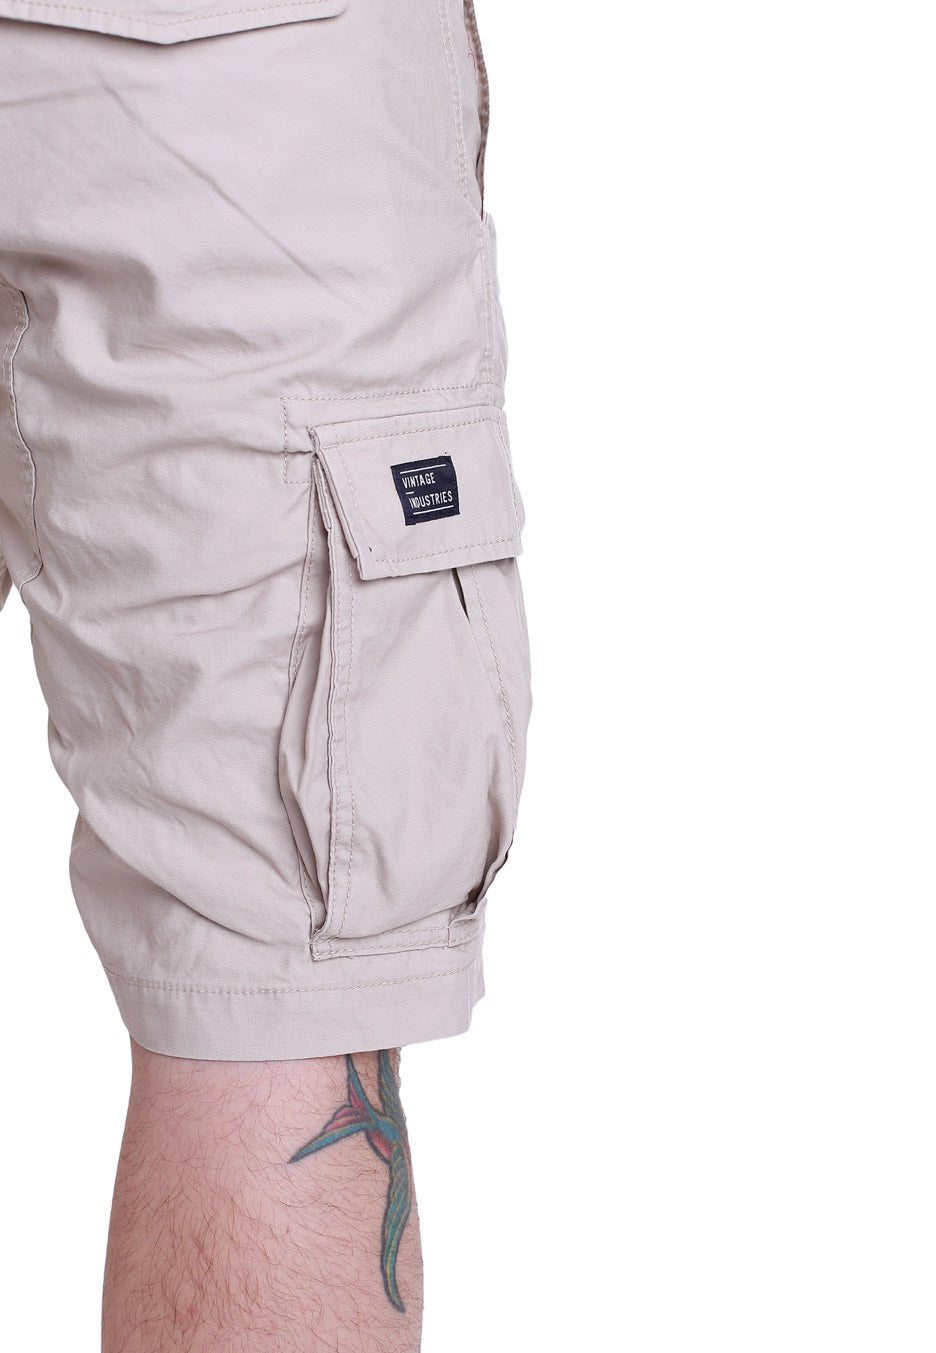 Vintage Industries - Kirby Stone - Shorts